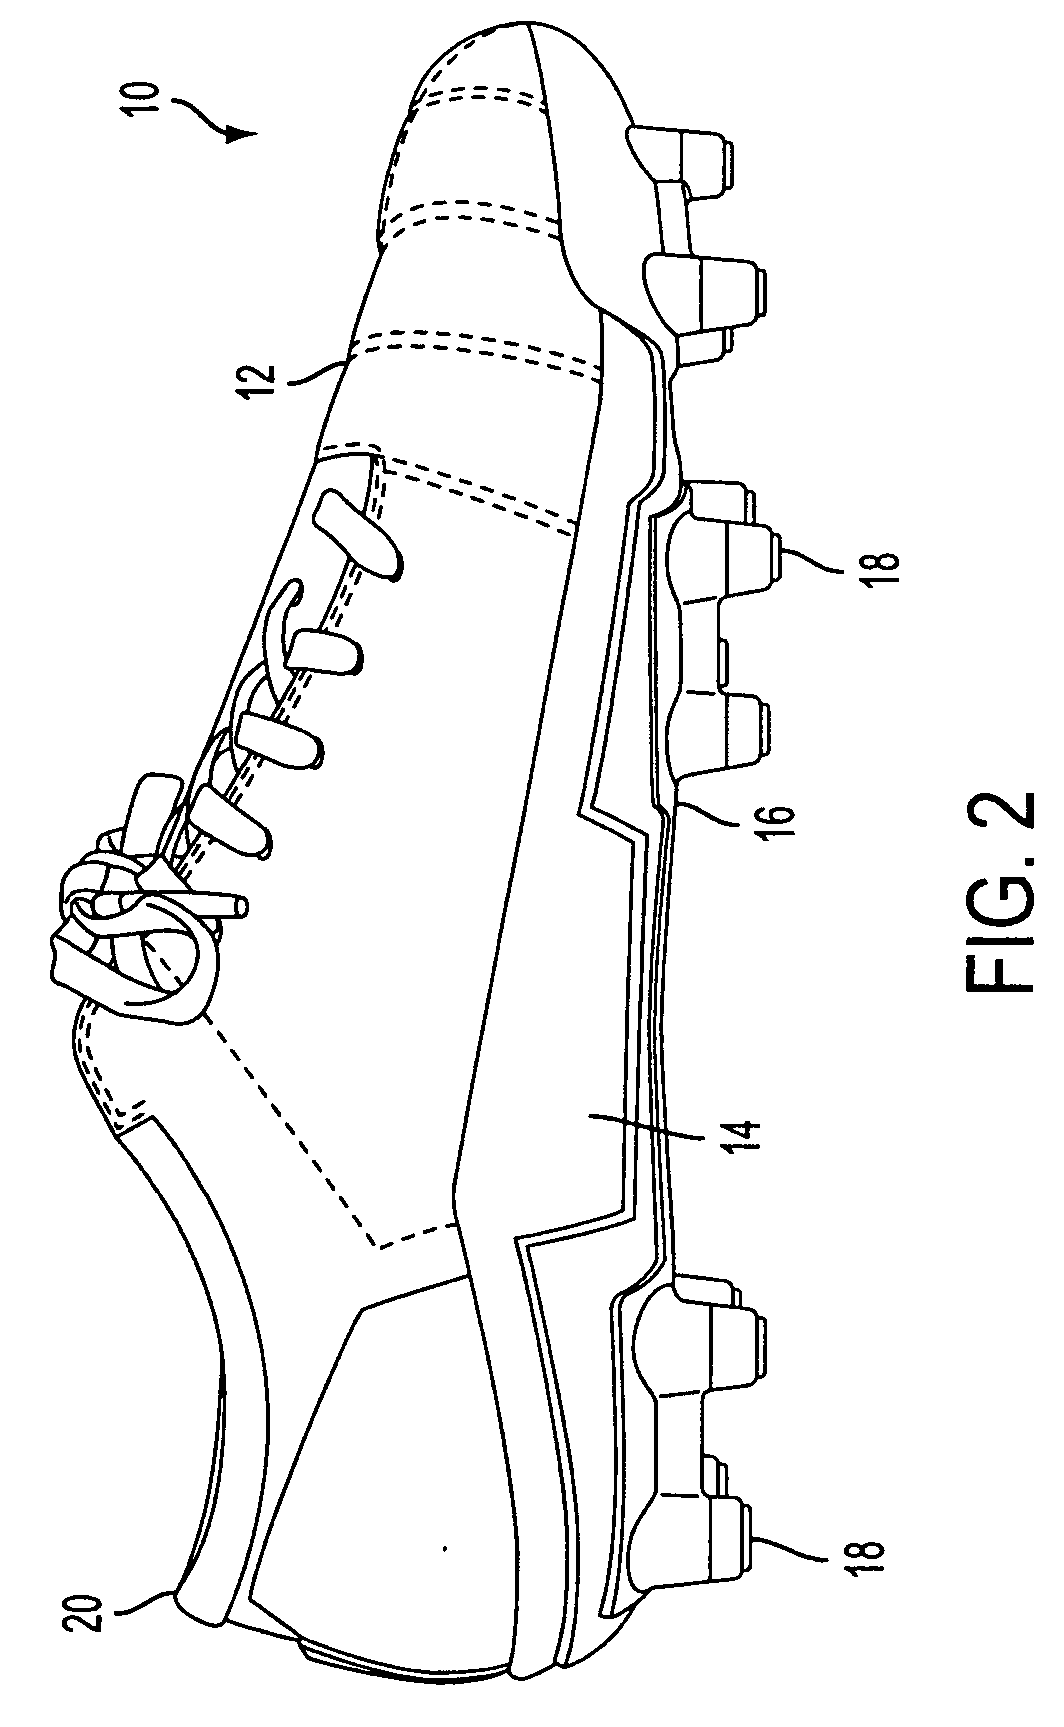 Soccer shoe having independently supported lateral and medial sides